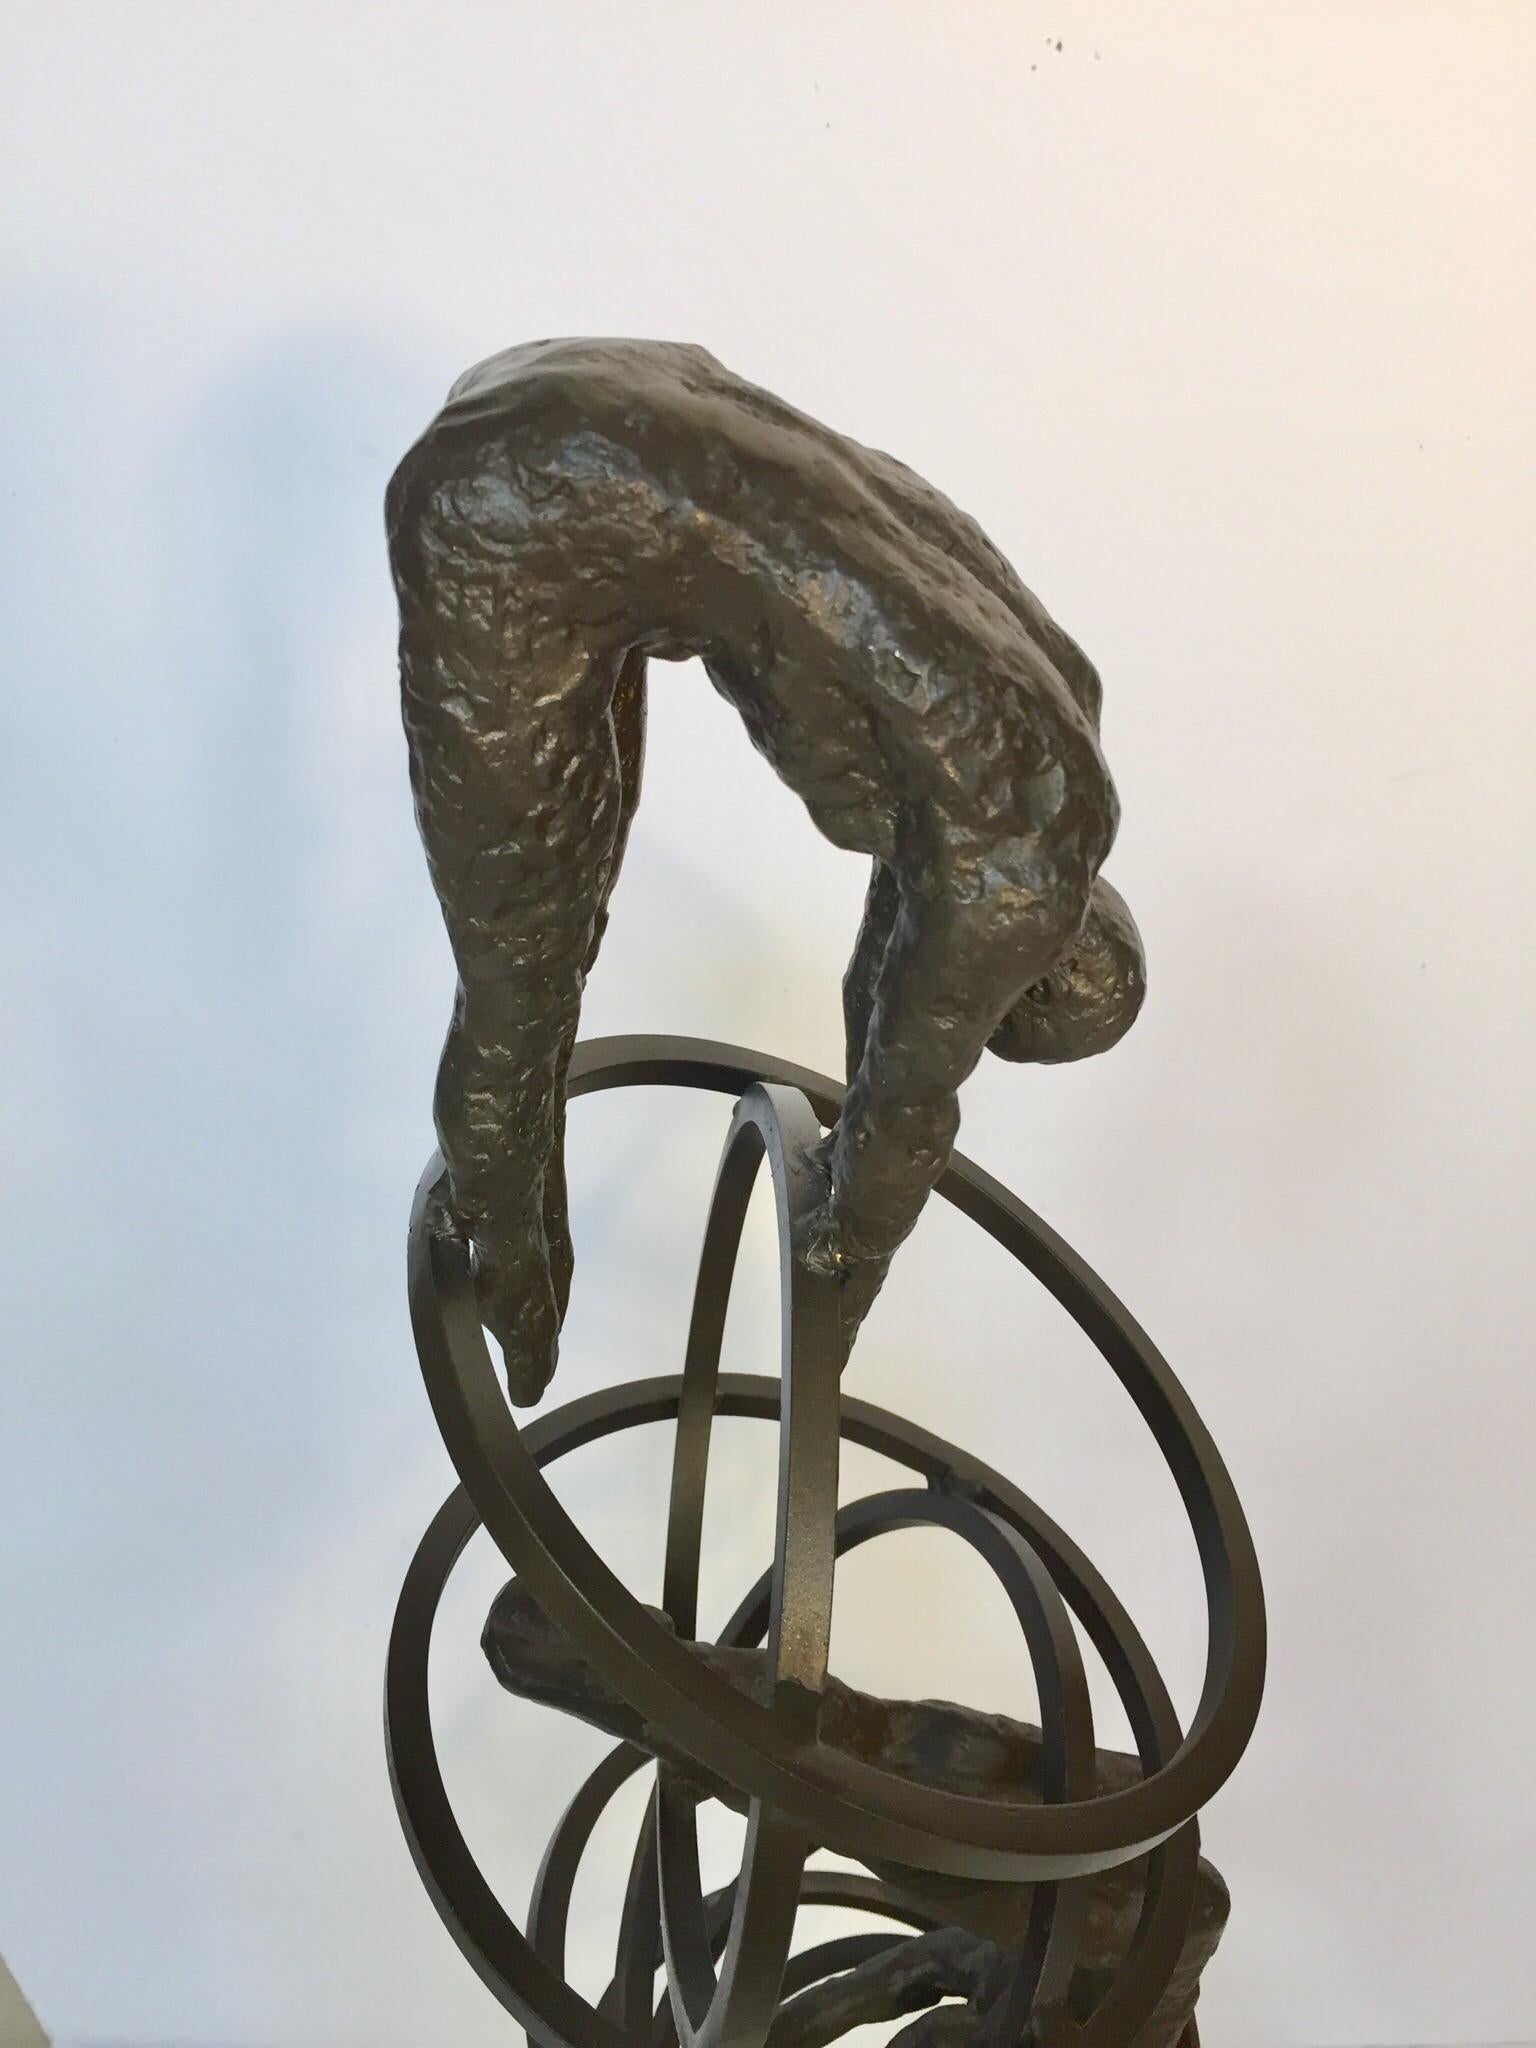 Vintage Modern cast iron Brutalist style sculpture of divers on rings sculpture on marble stand.
Captured in mid-dive in cast iron, these handsome divers sculpture pay homage to the fluid precision of a professional diver.
Measures: 12 inch x by 8